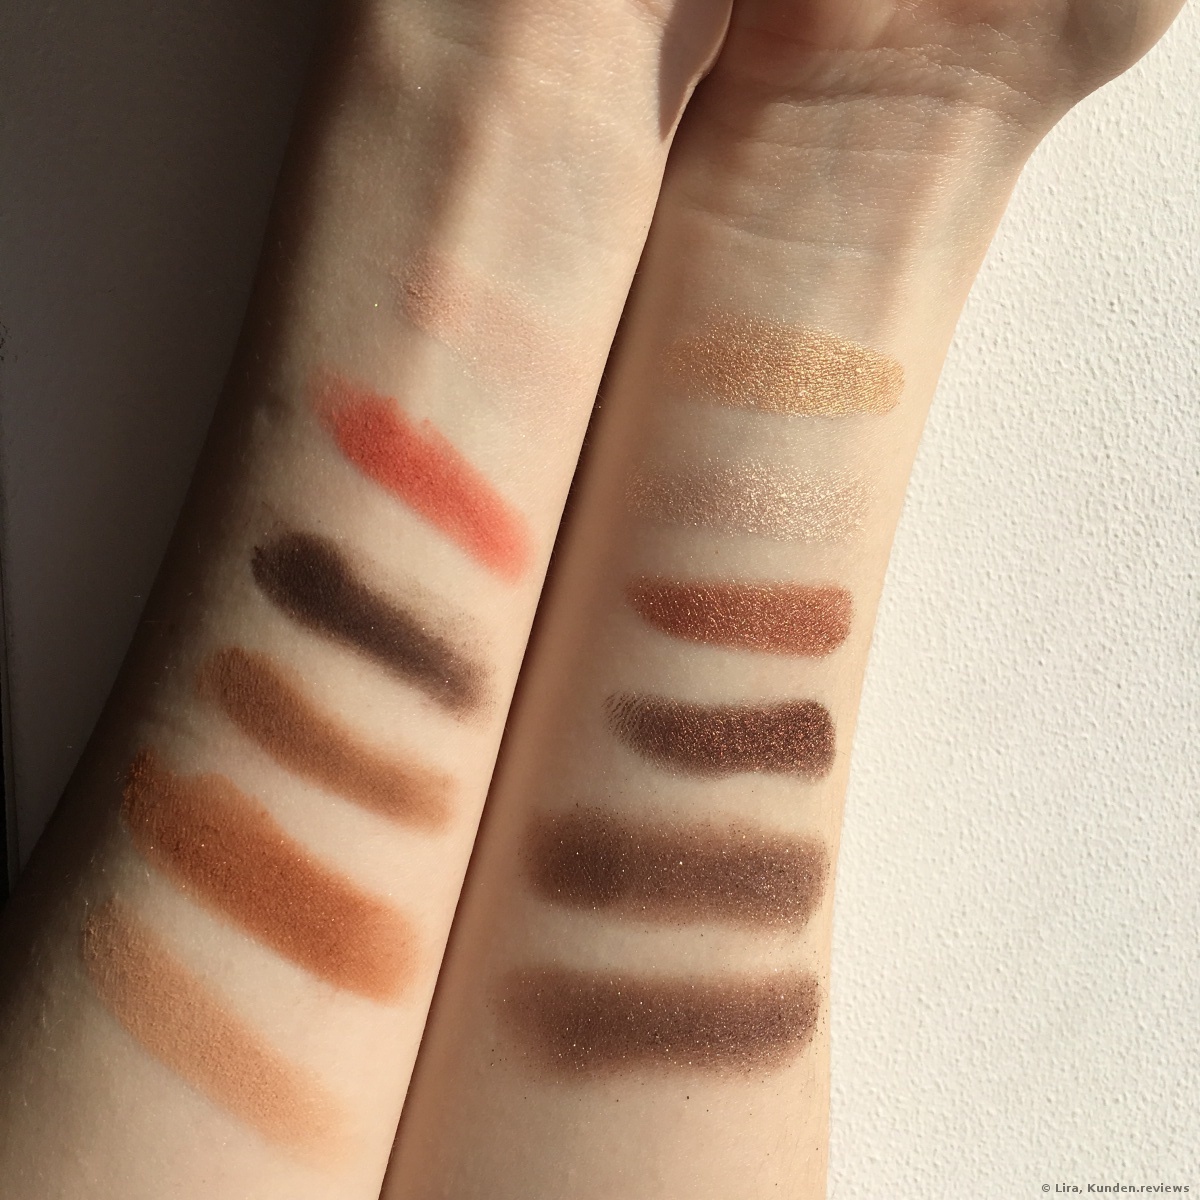 Naked Reloaded Palette von Urban Decay